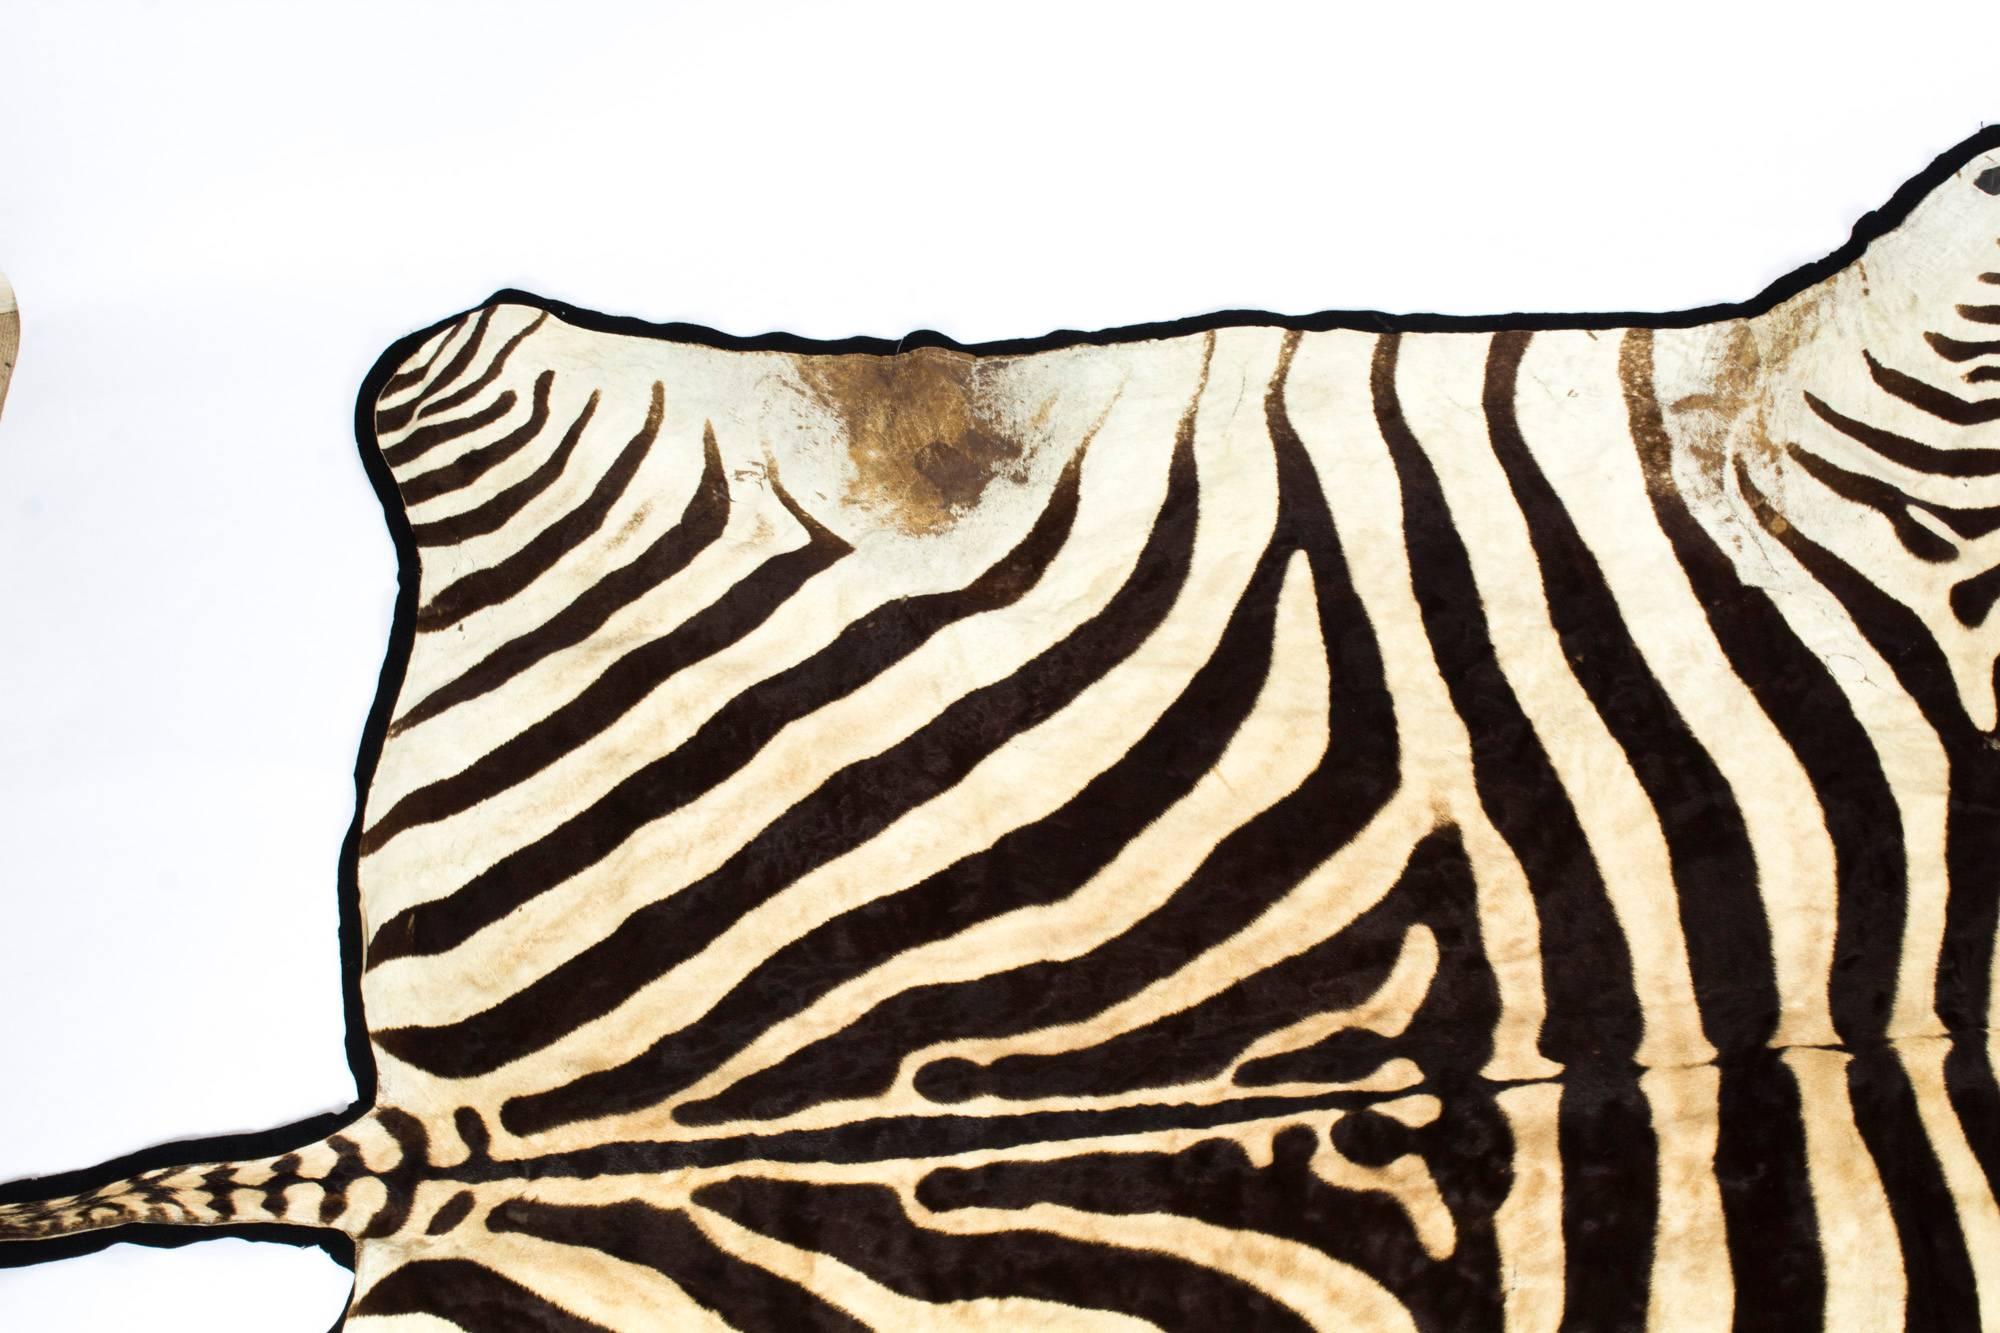 Late 20th Century Vintage Large Taxidermy Zebra Skin Rug with Felt Backing, 20th Century